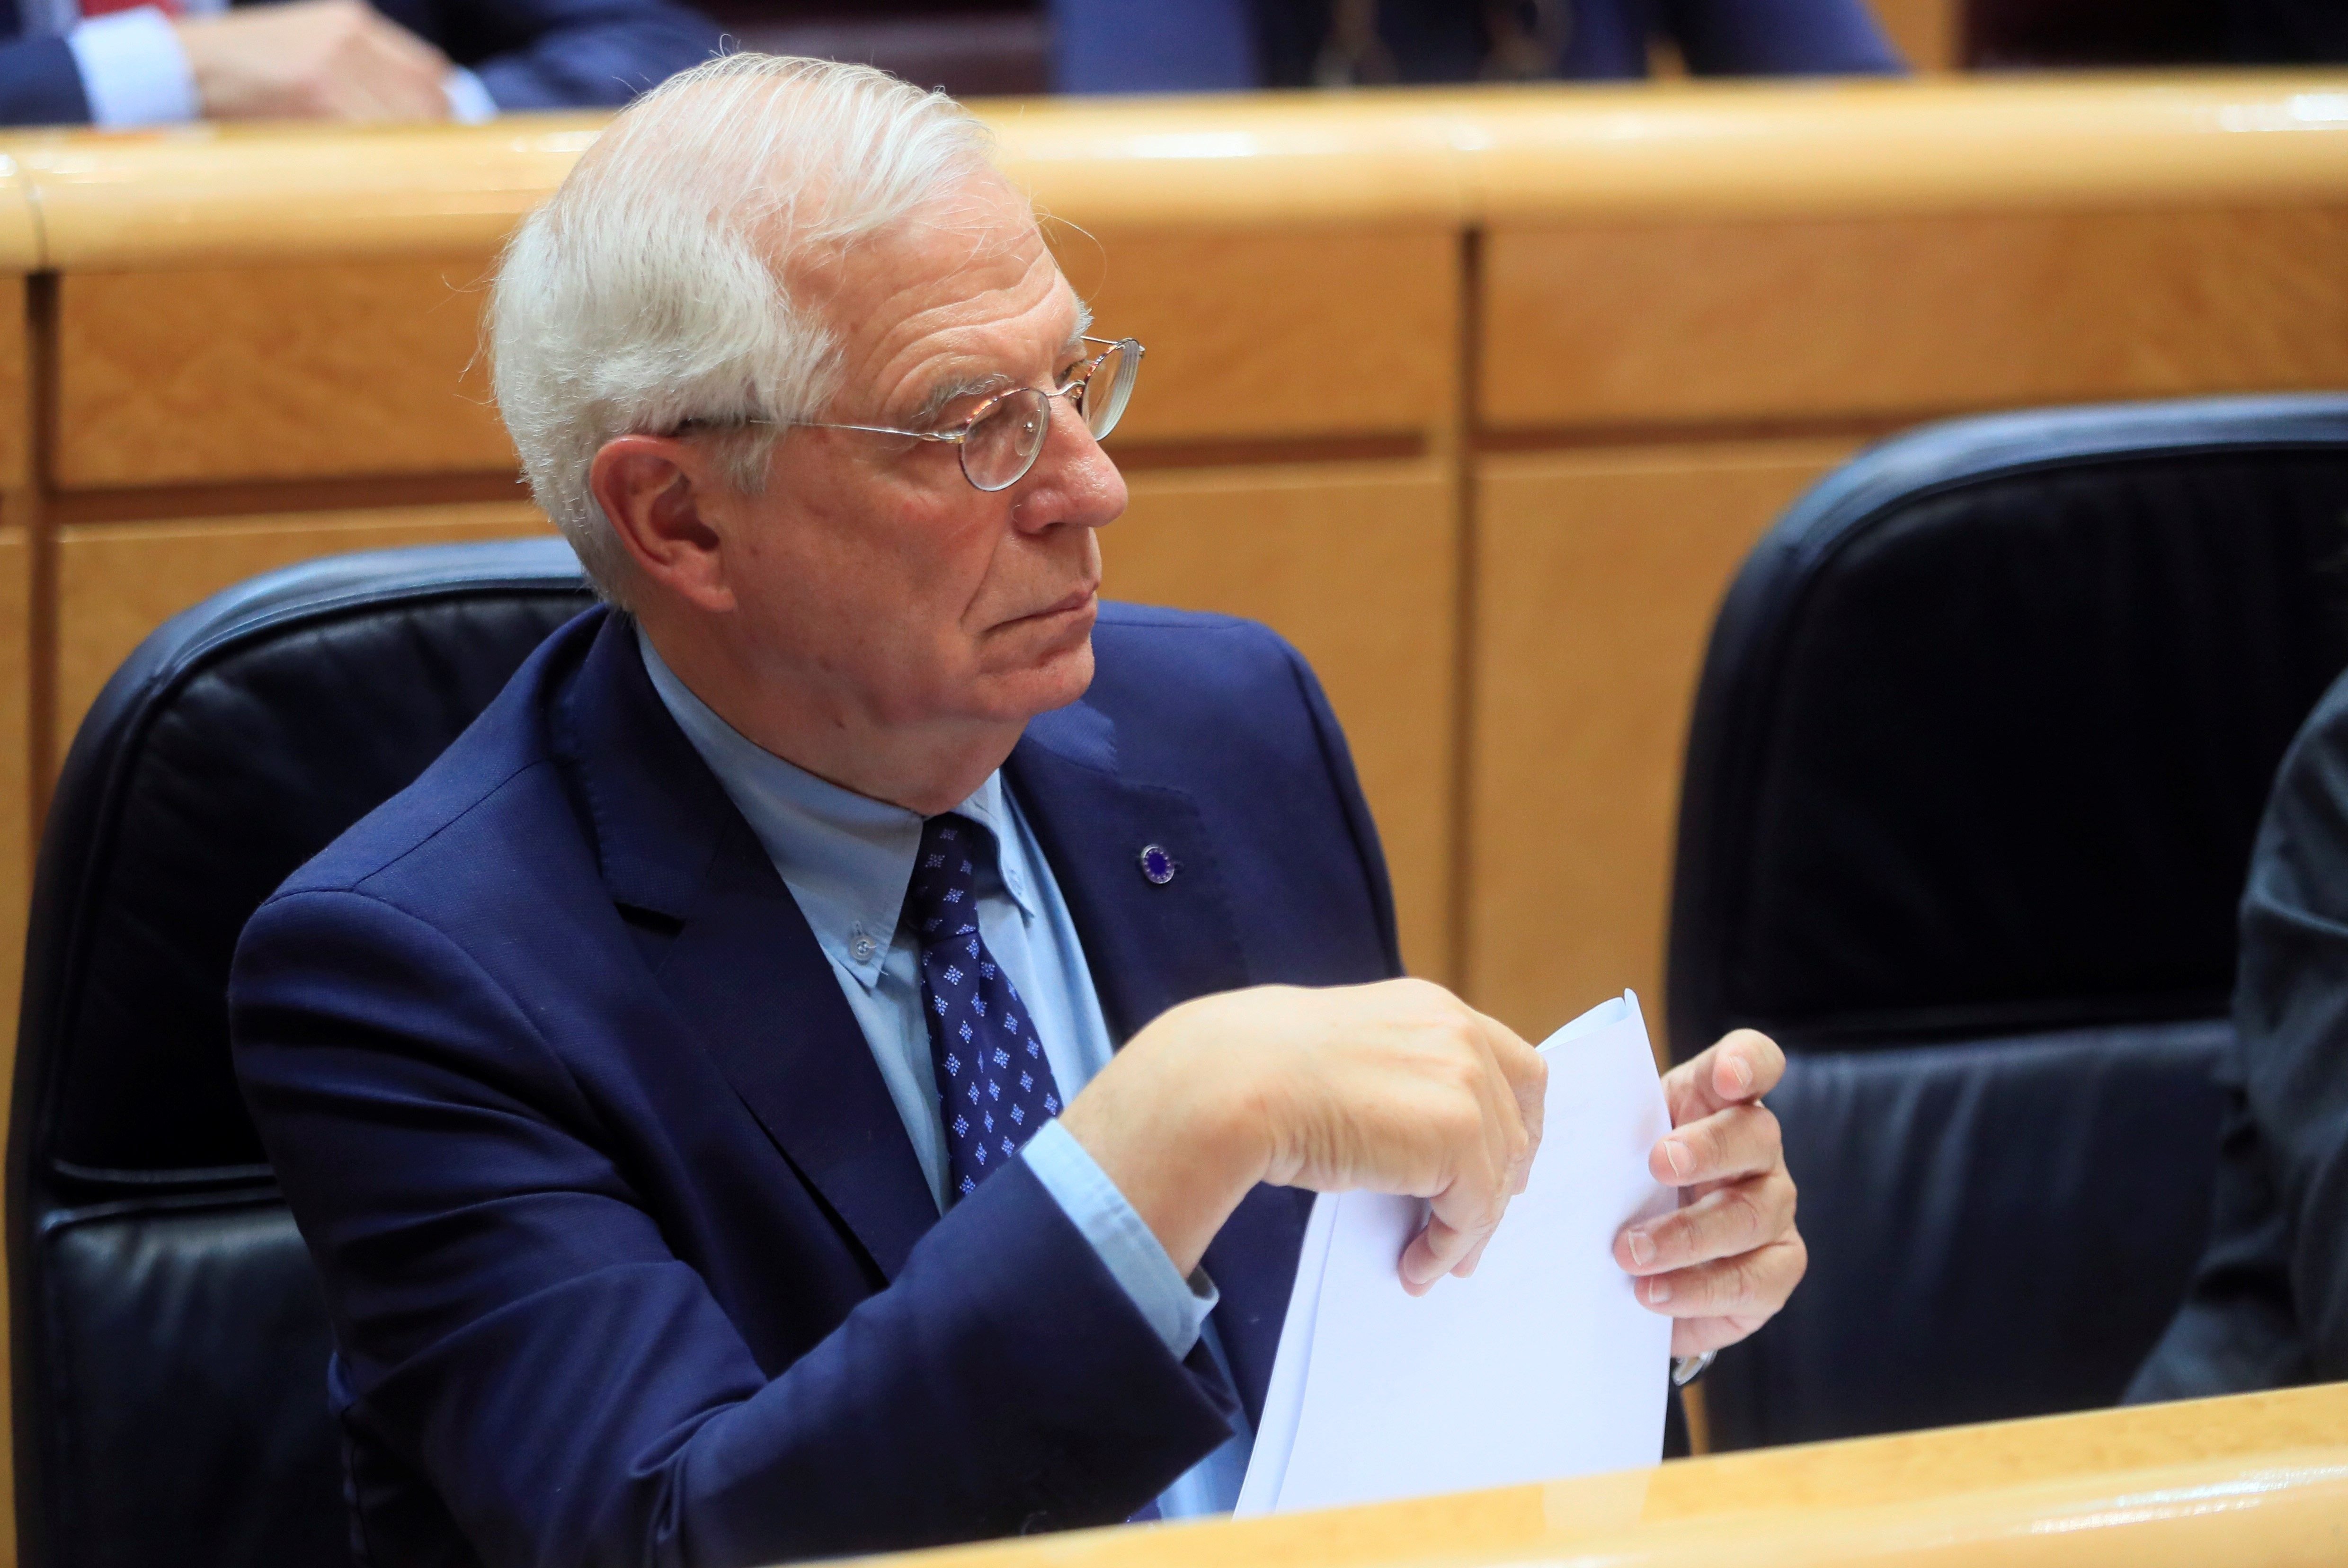 Spain's foreign minister Borrell looks to return to the European Parliament